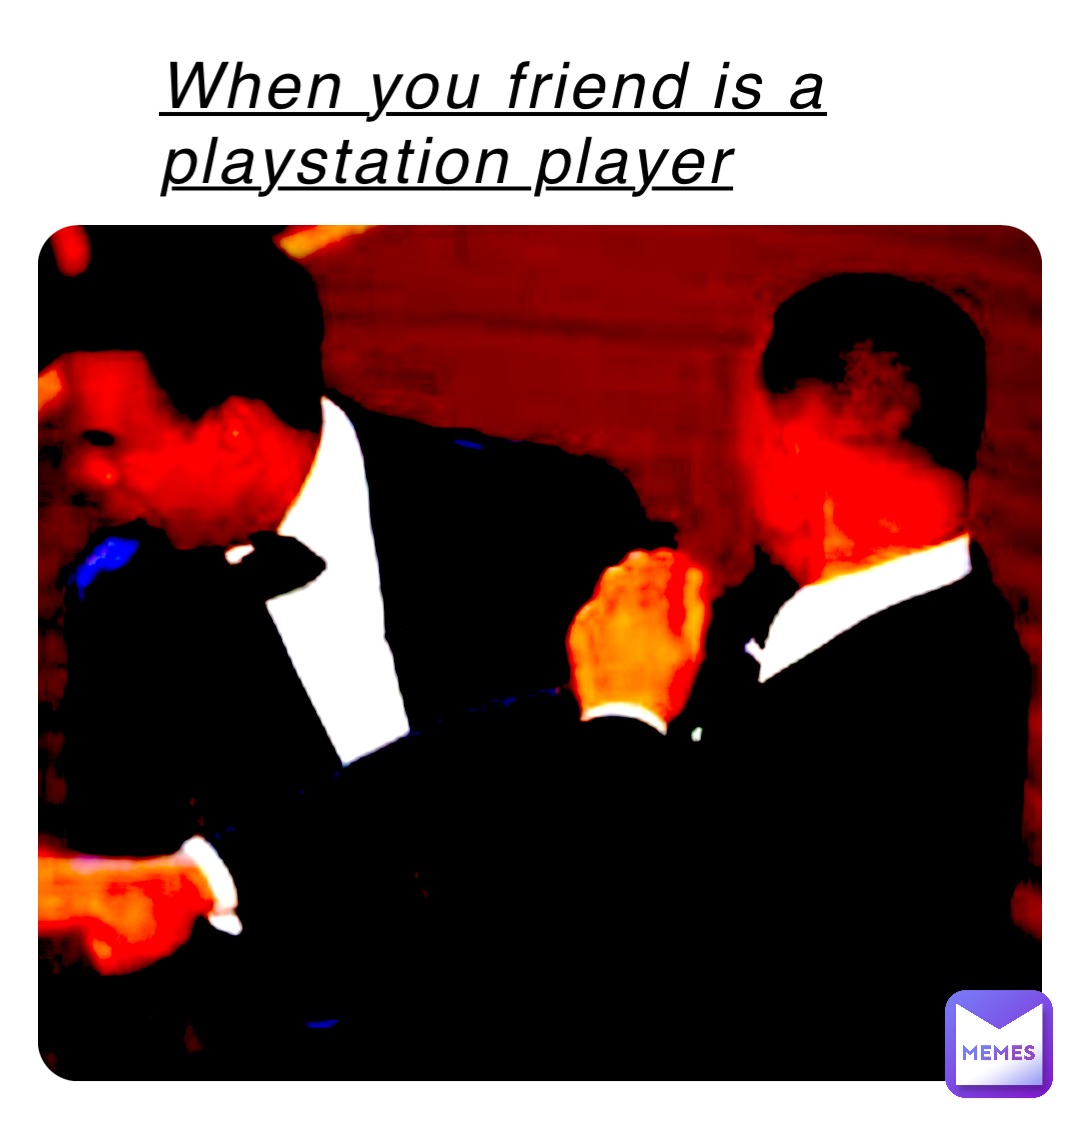 When you friend is a PlayStation player